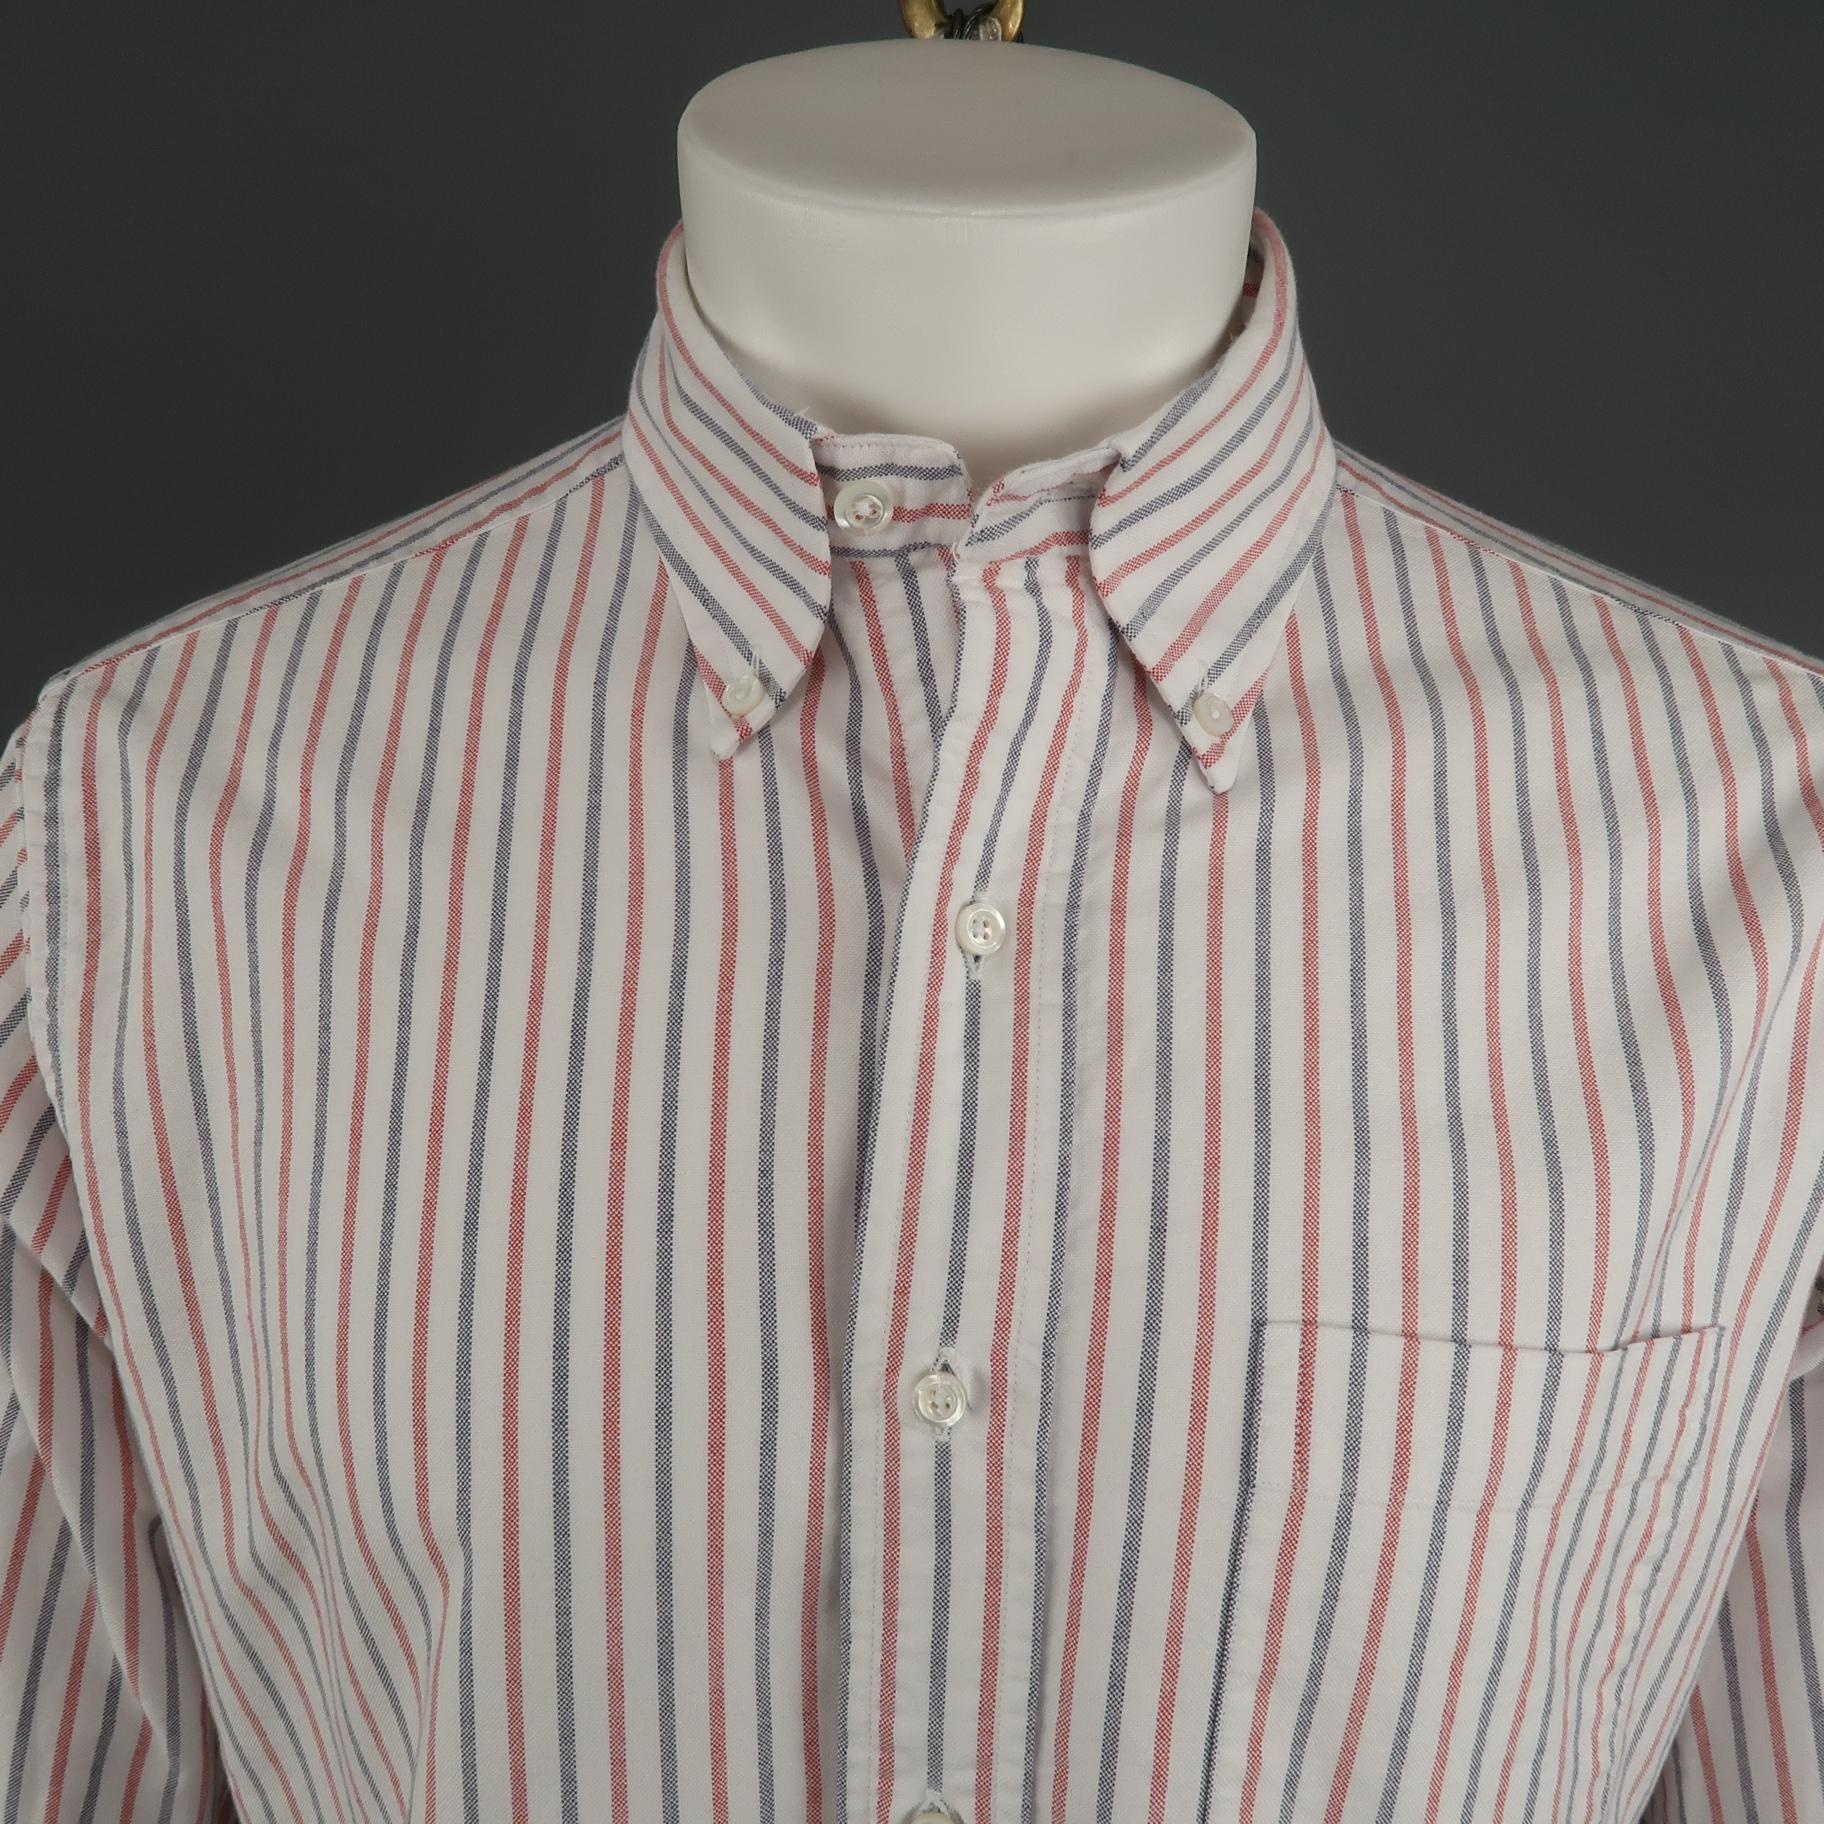 THOM BROWNE long sleeve shirt comes in a red, white, blue stripe cotton. Also, includes a classic button down collar and a front patch pocket. Made in USA.
 
Excellent Pre-Owned Condition.
Marked: 4
 
Measurements:
 
Shoulder: 18 in.
Chest: 48